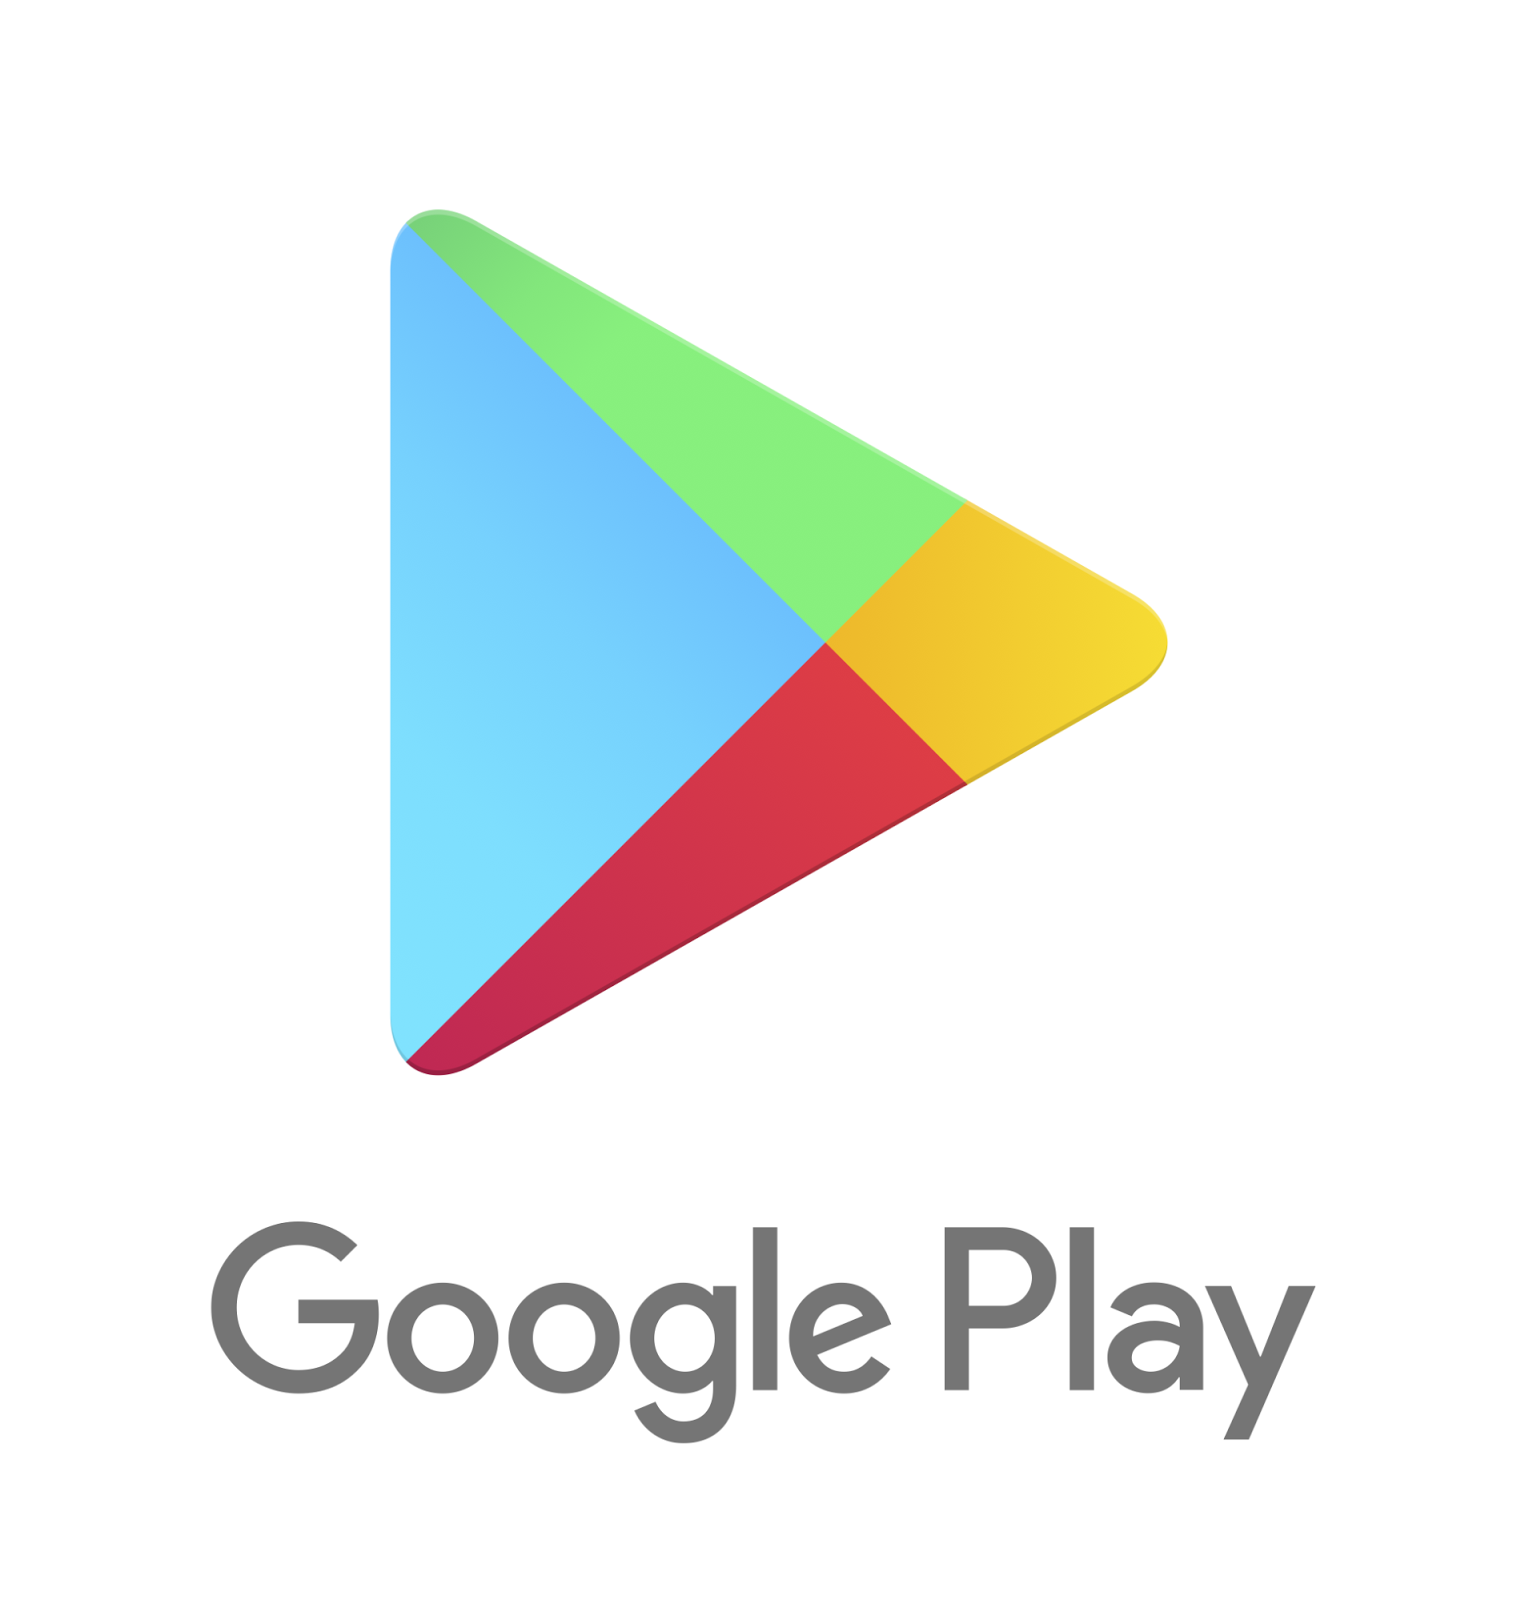 Android Developers Blog: Grow your games business on Google Play